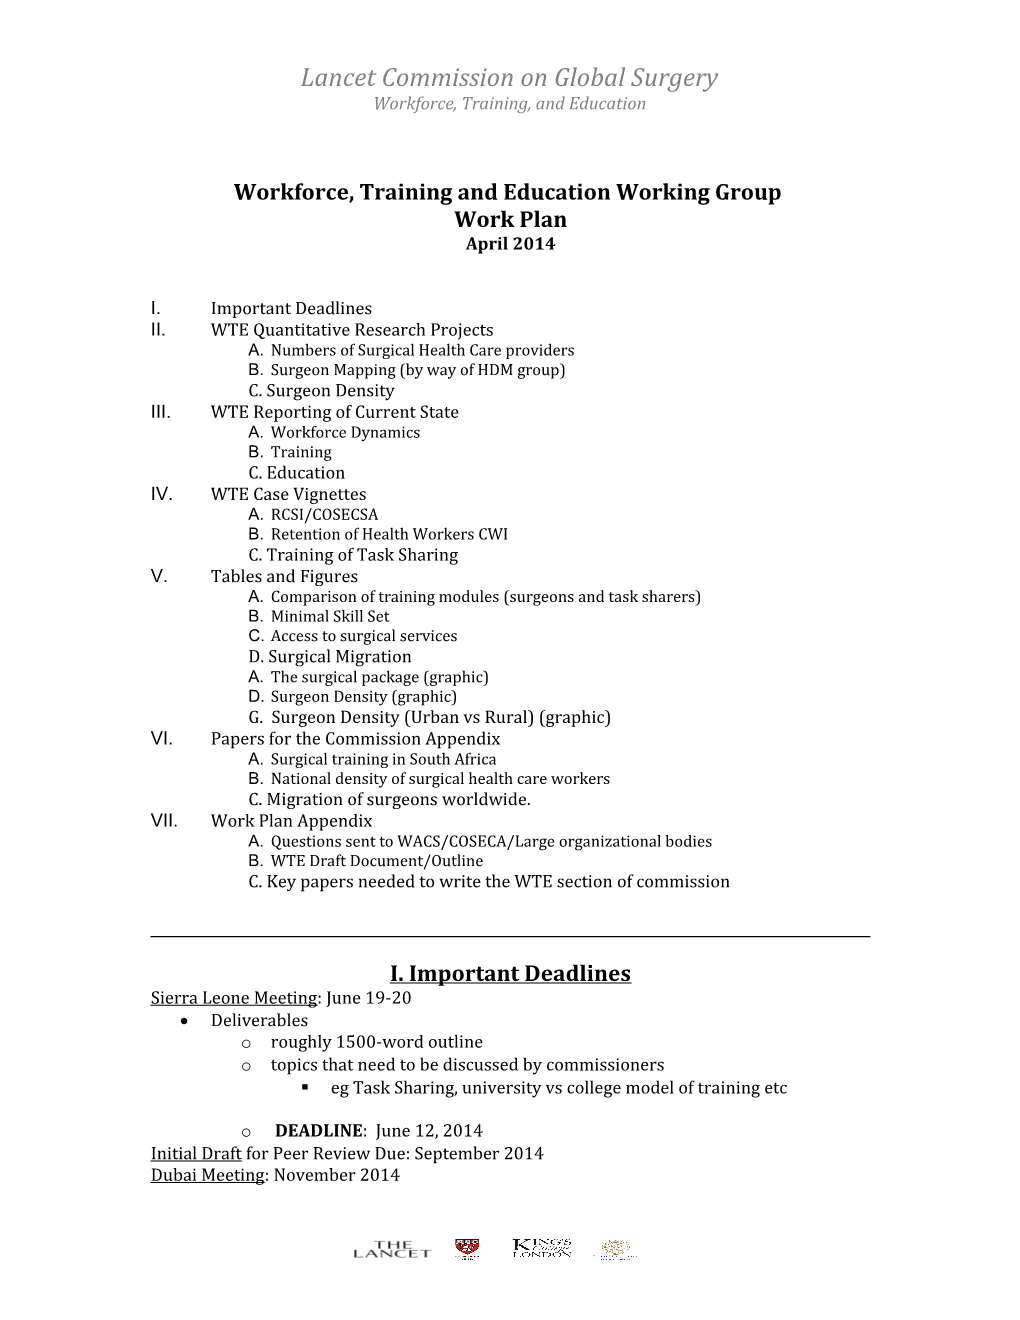 Workforce, Training and Education Working Group